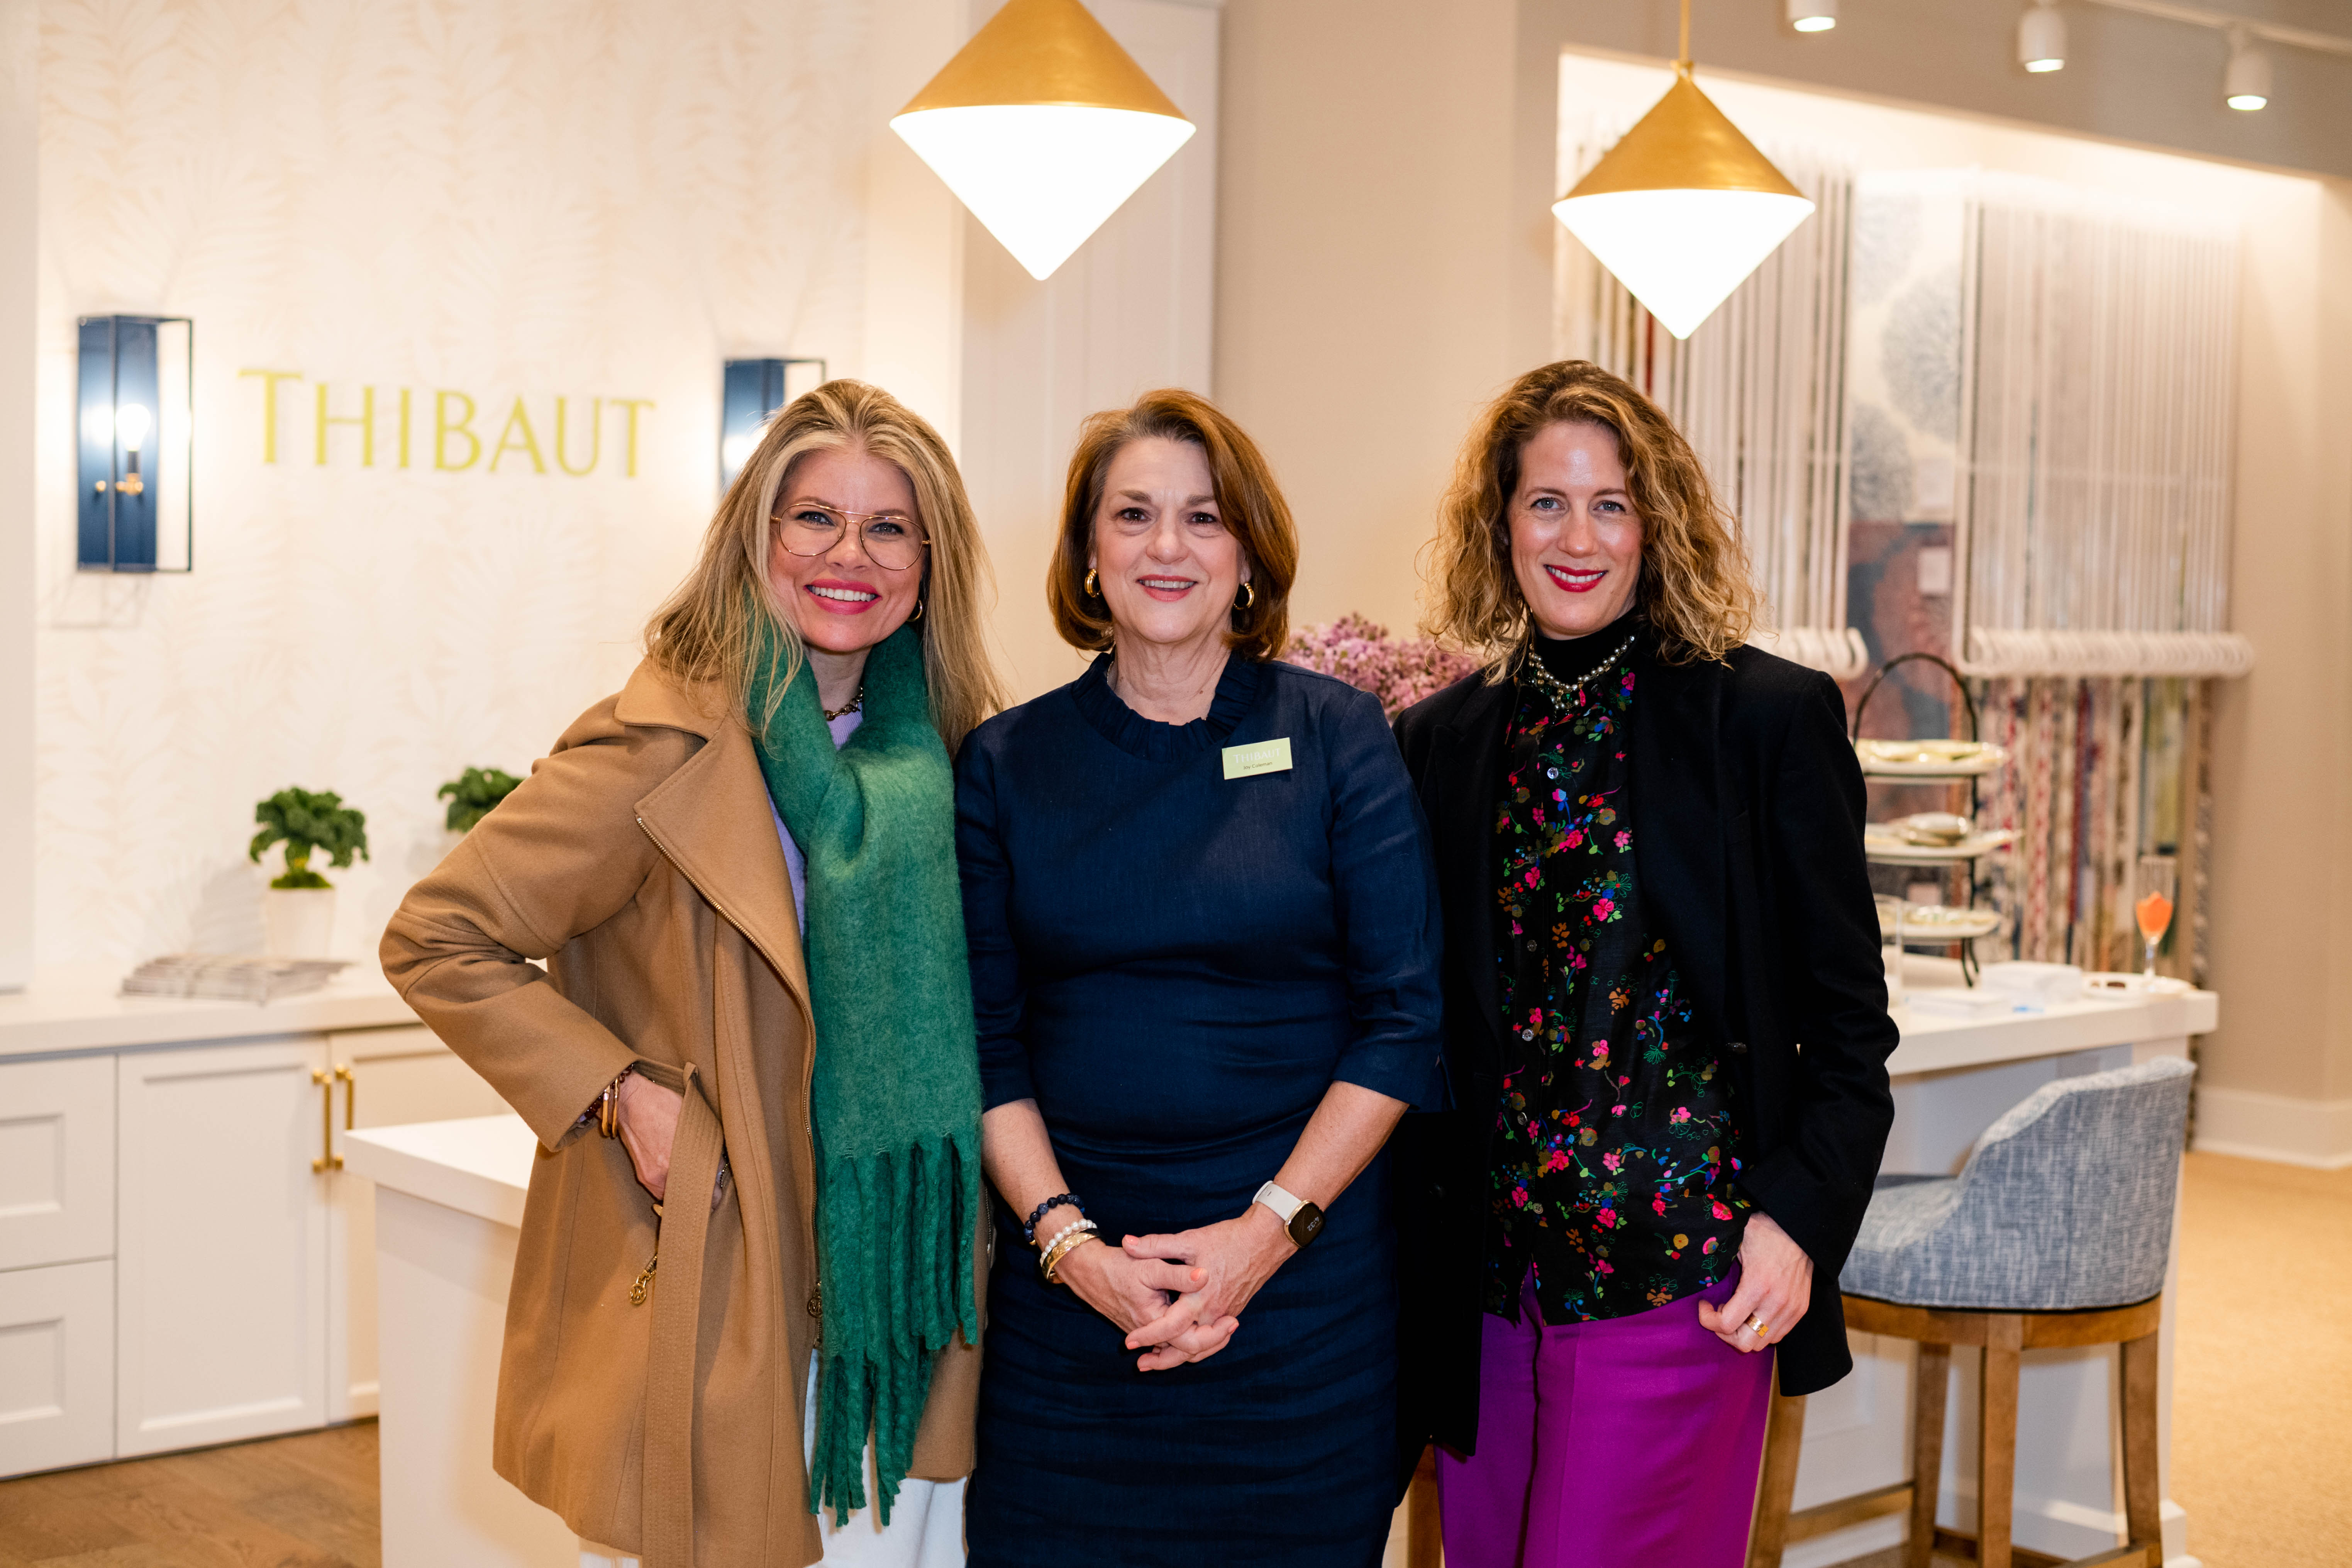 Thibaut’s Dallas showroom preview party